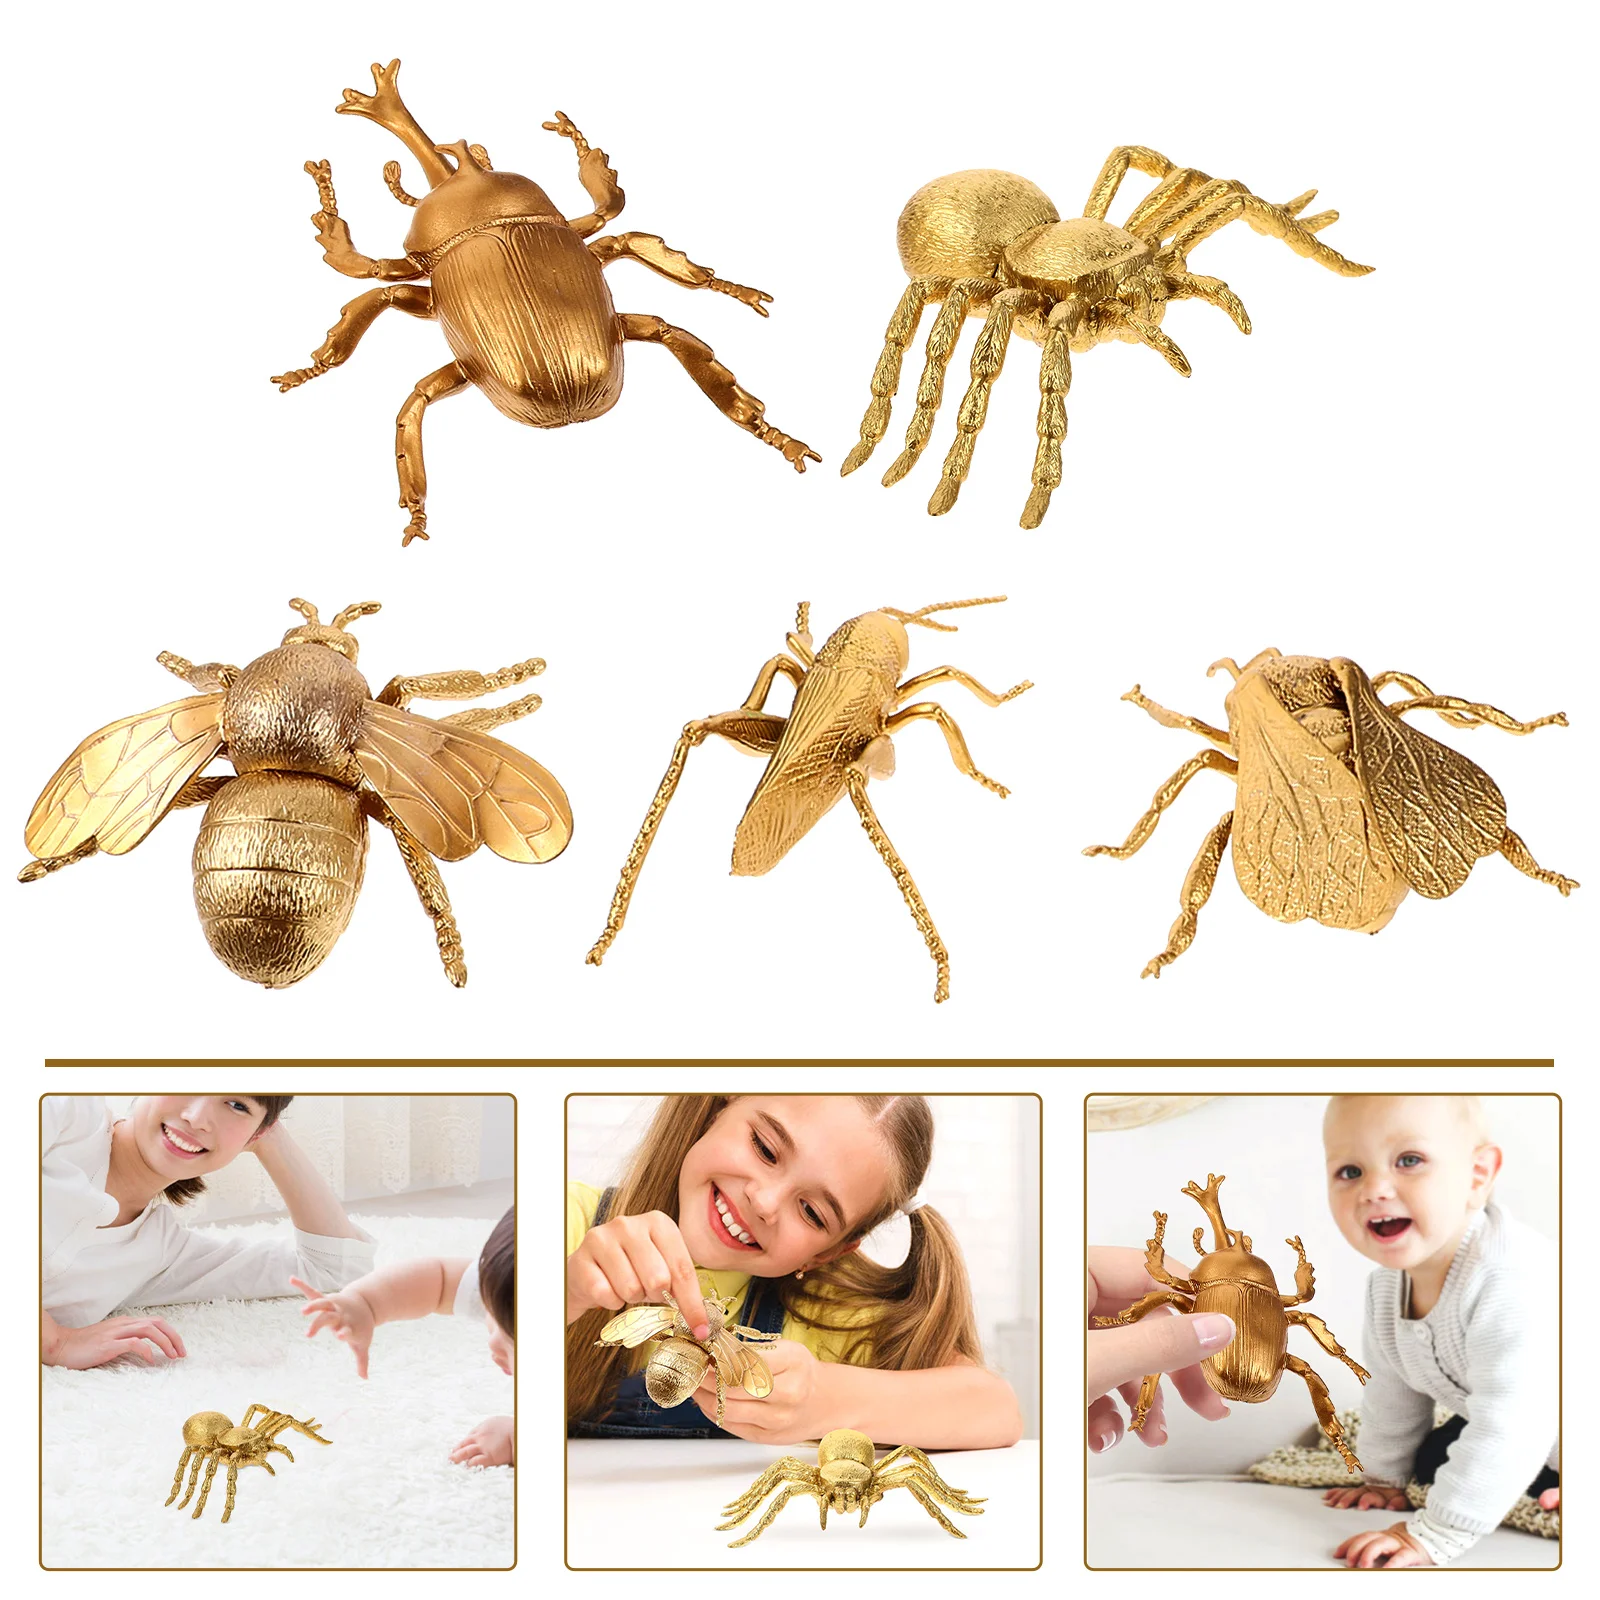 

5 Pcs Insect Knowledge Figurine Teaching Prop Crawl Toys Simulation Insects Plastic Kids Supply Model